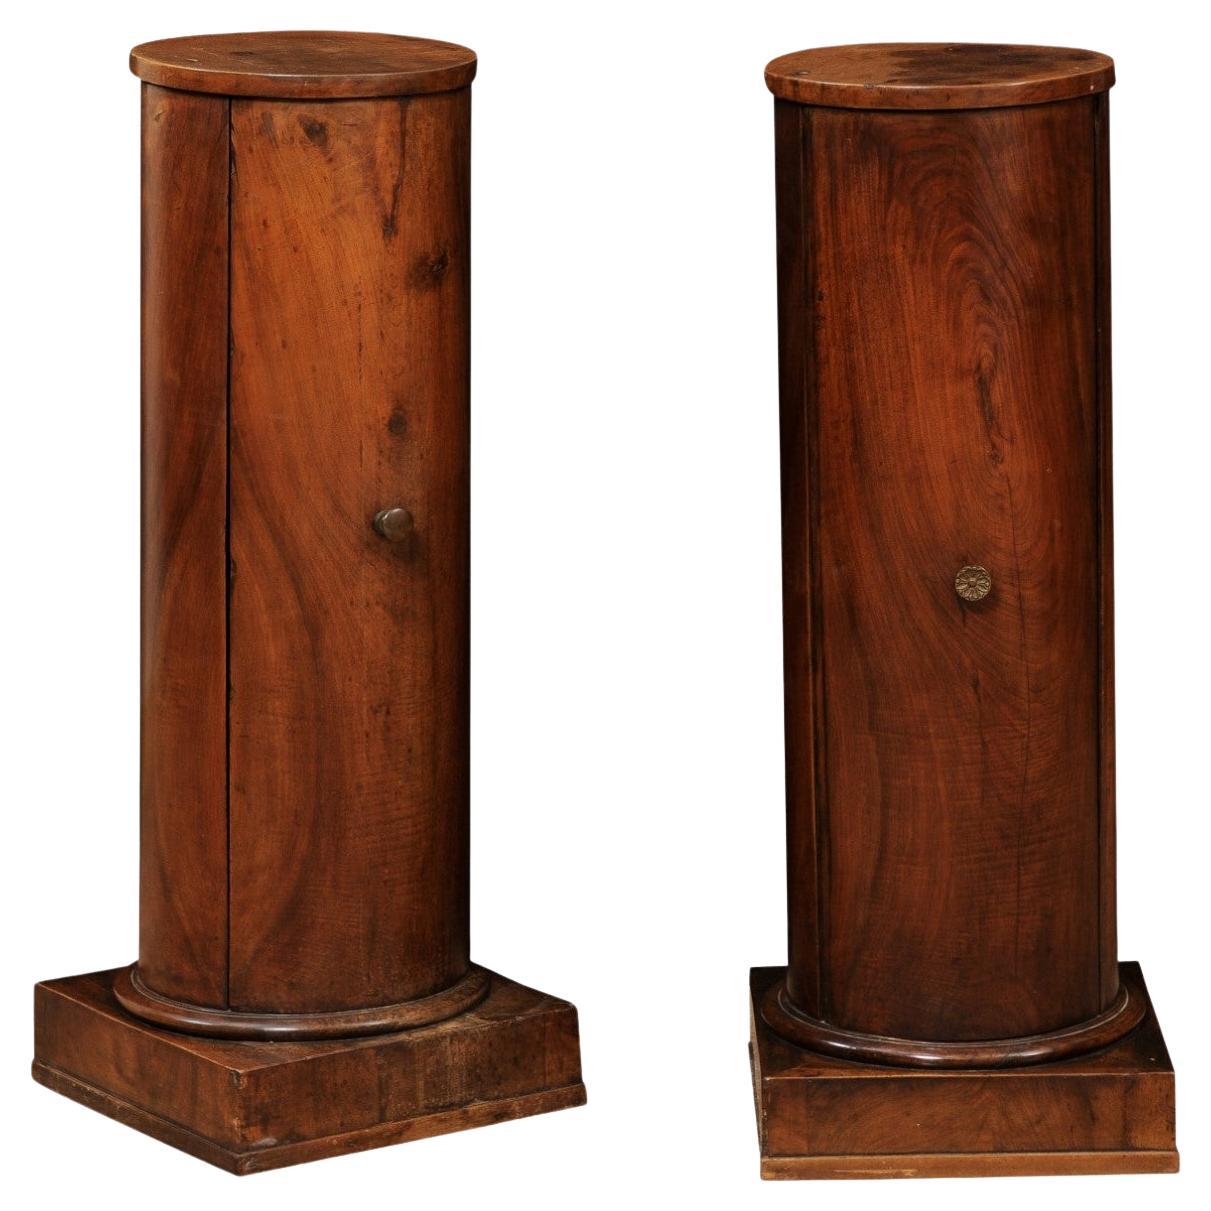 Pair of Early 19th Century Italian Neoclassical Walnut Pedestal Cabinets For Sale